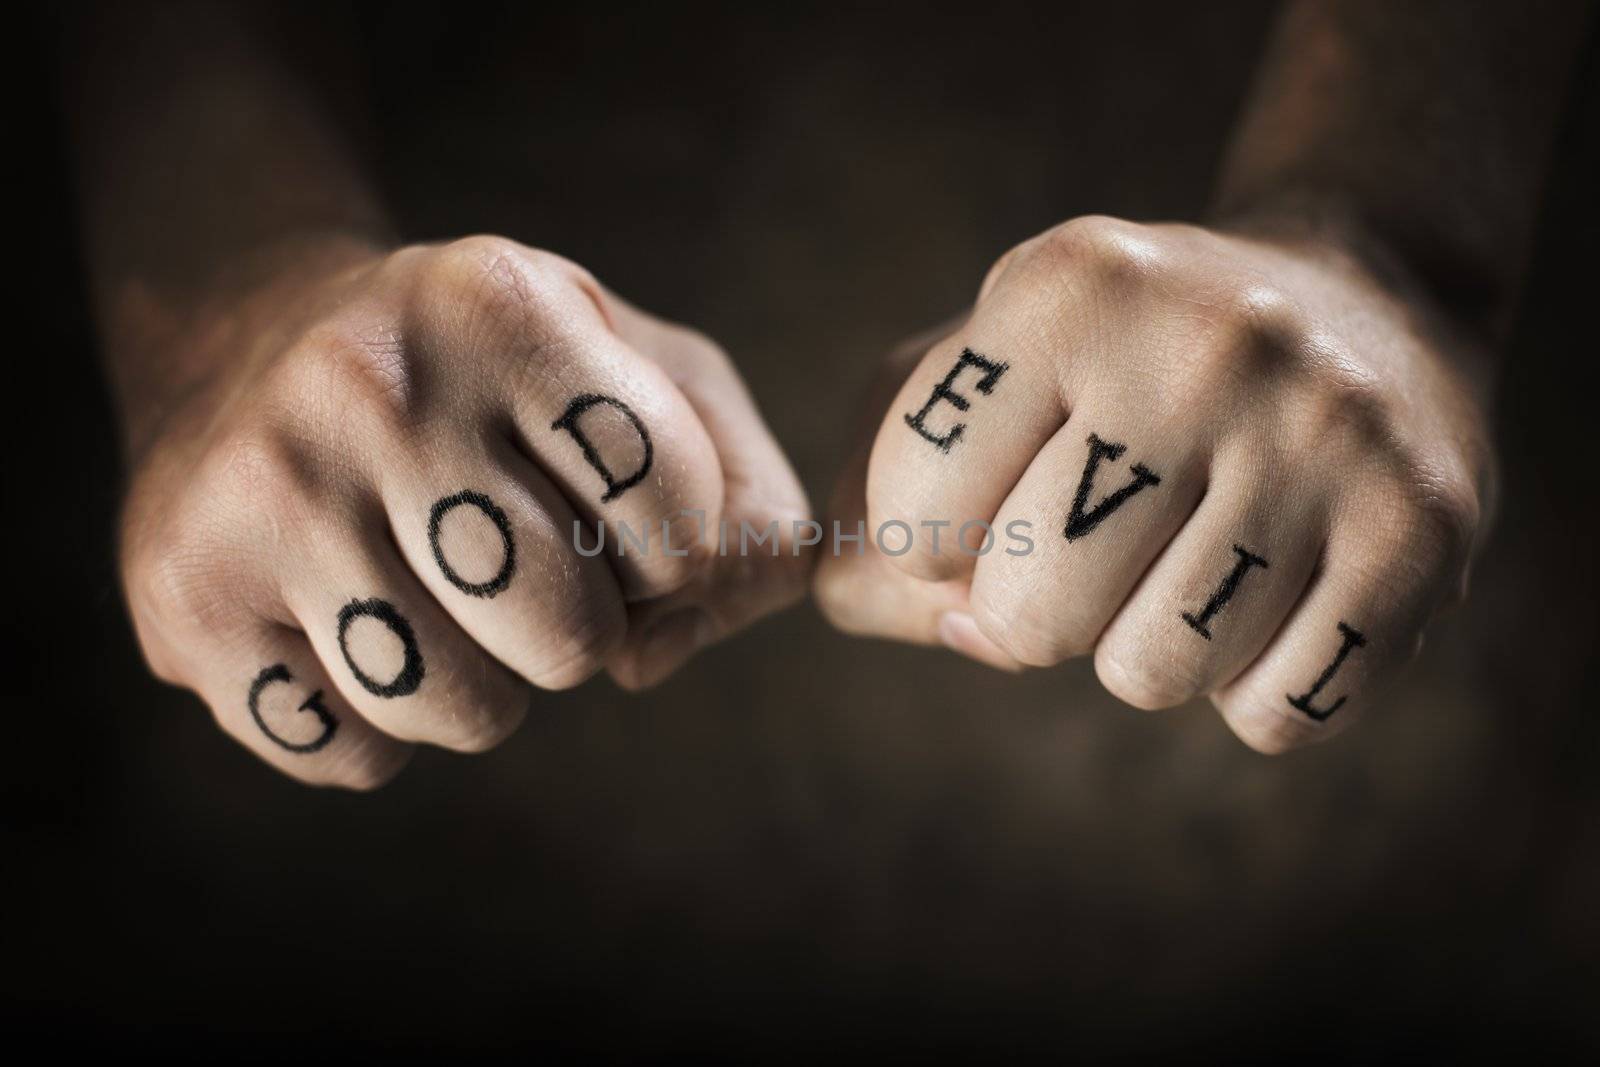 Good or Evil by Stocksnapper